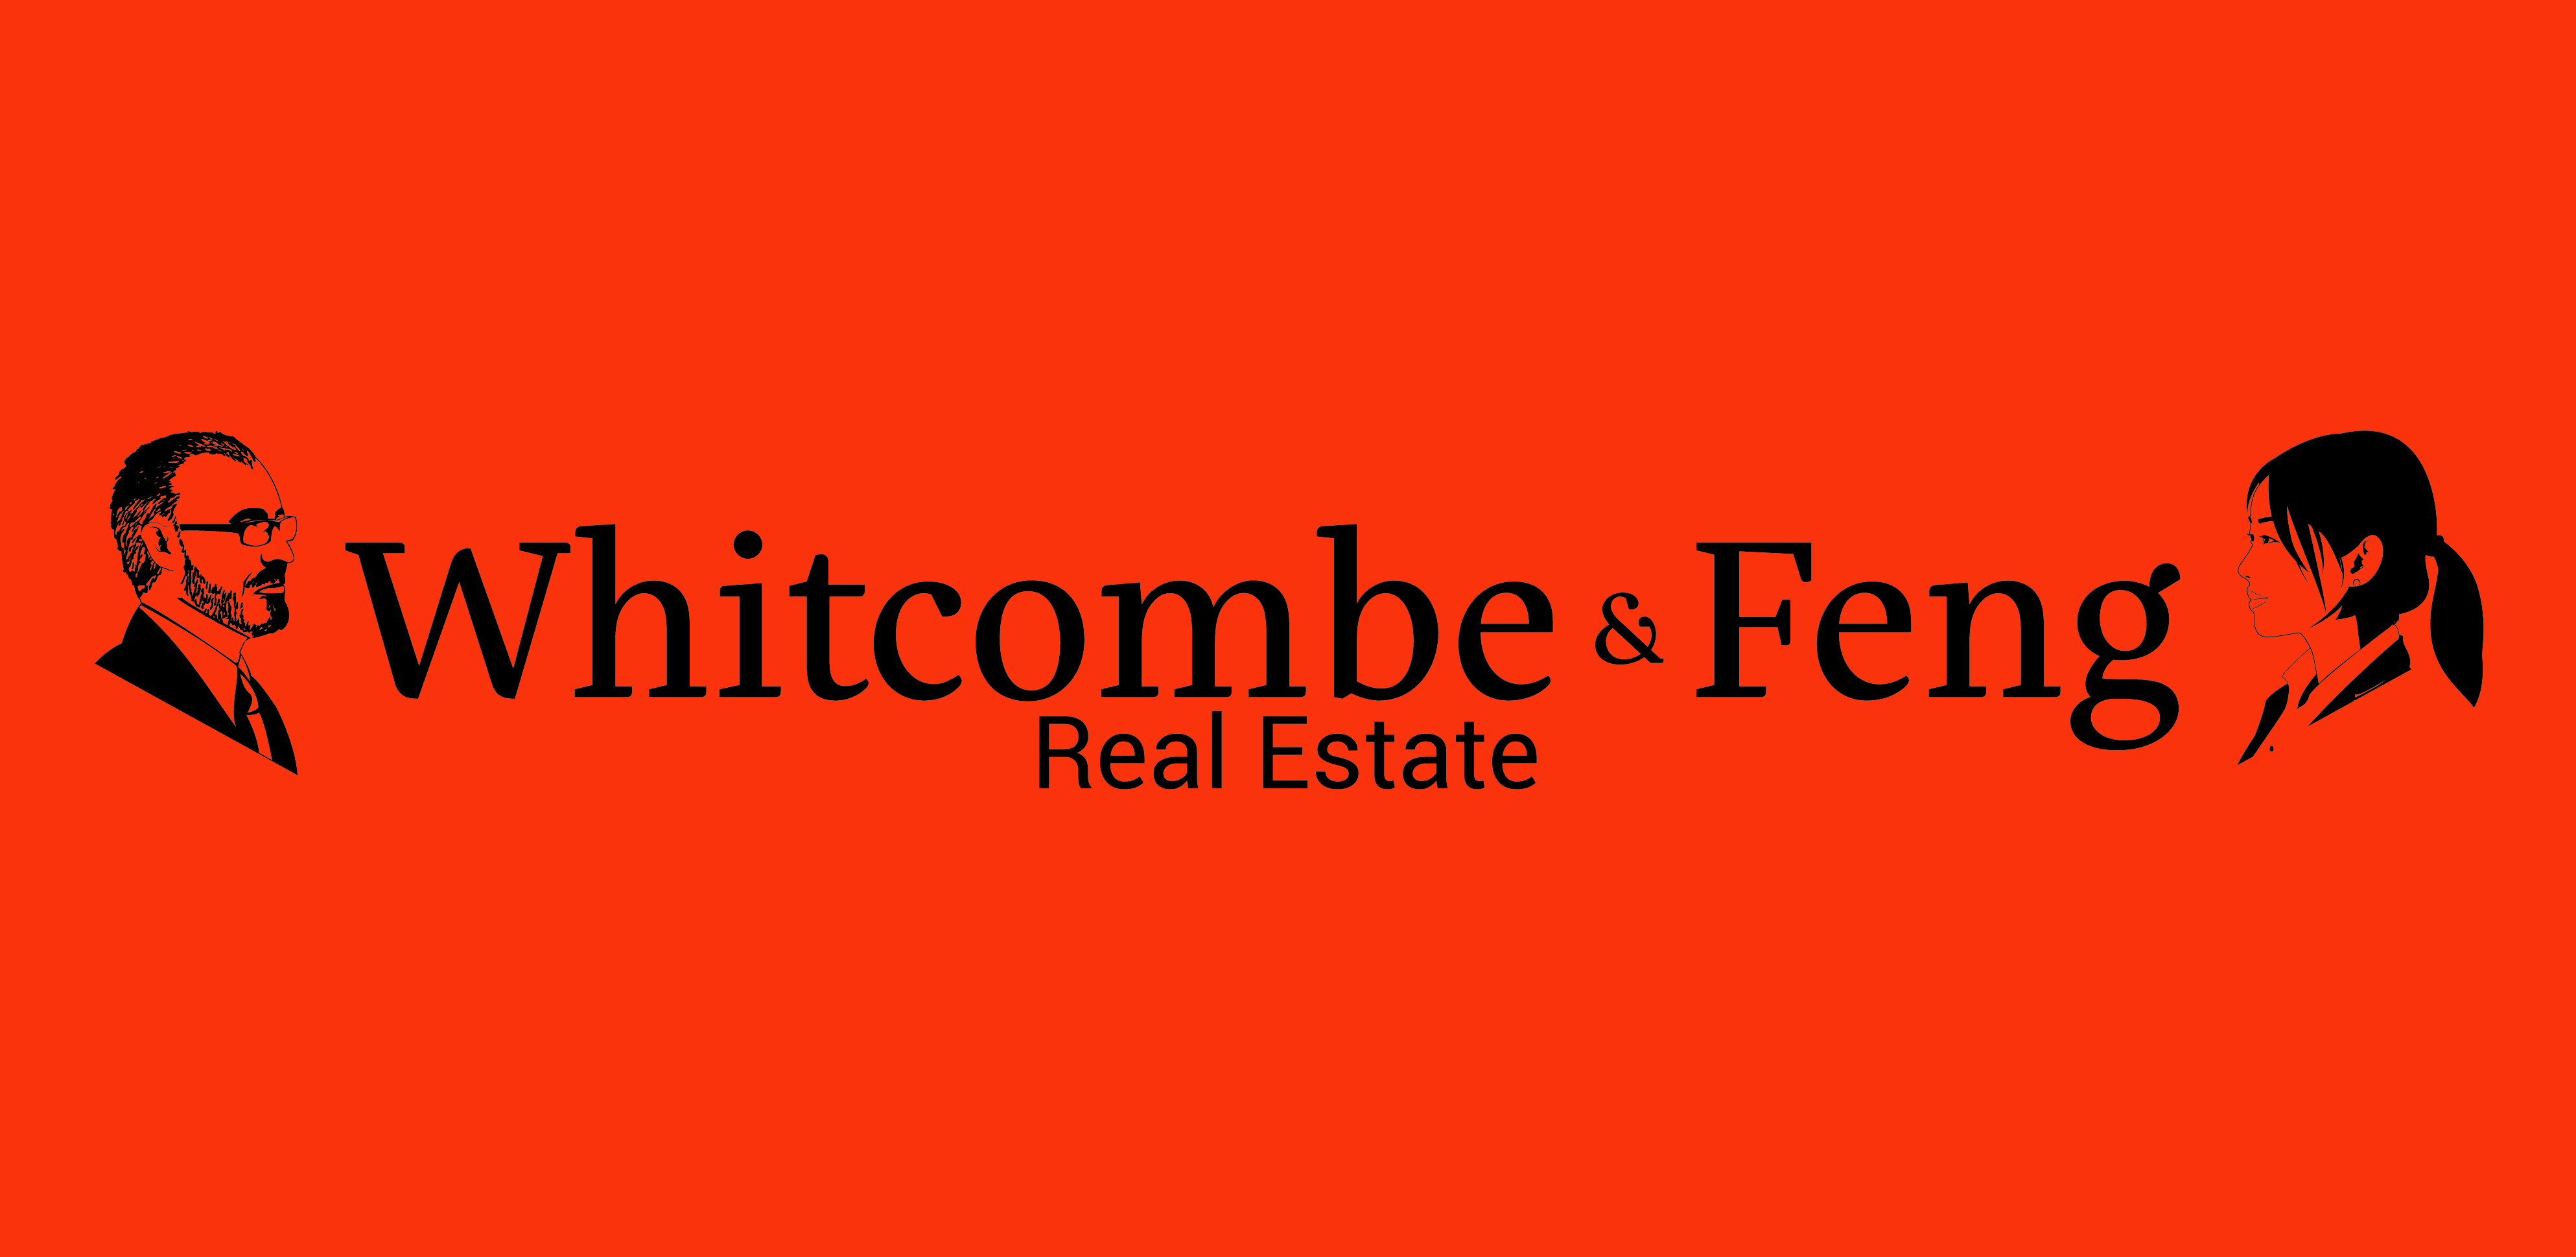 Whitcombe & Feng Real Estate